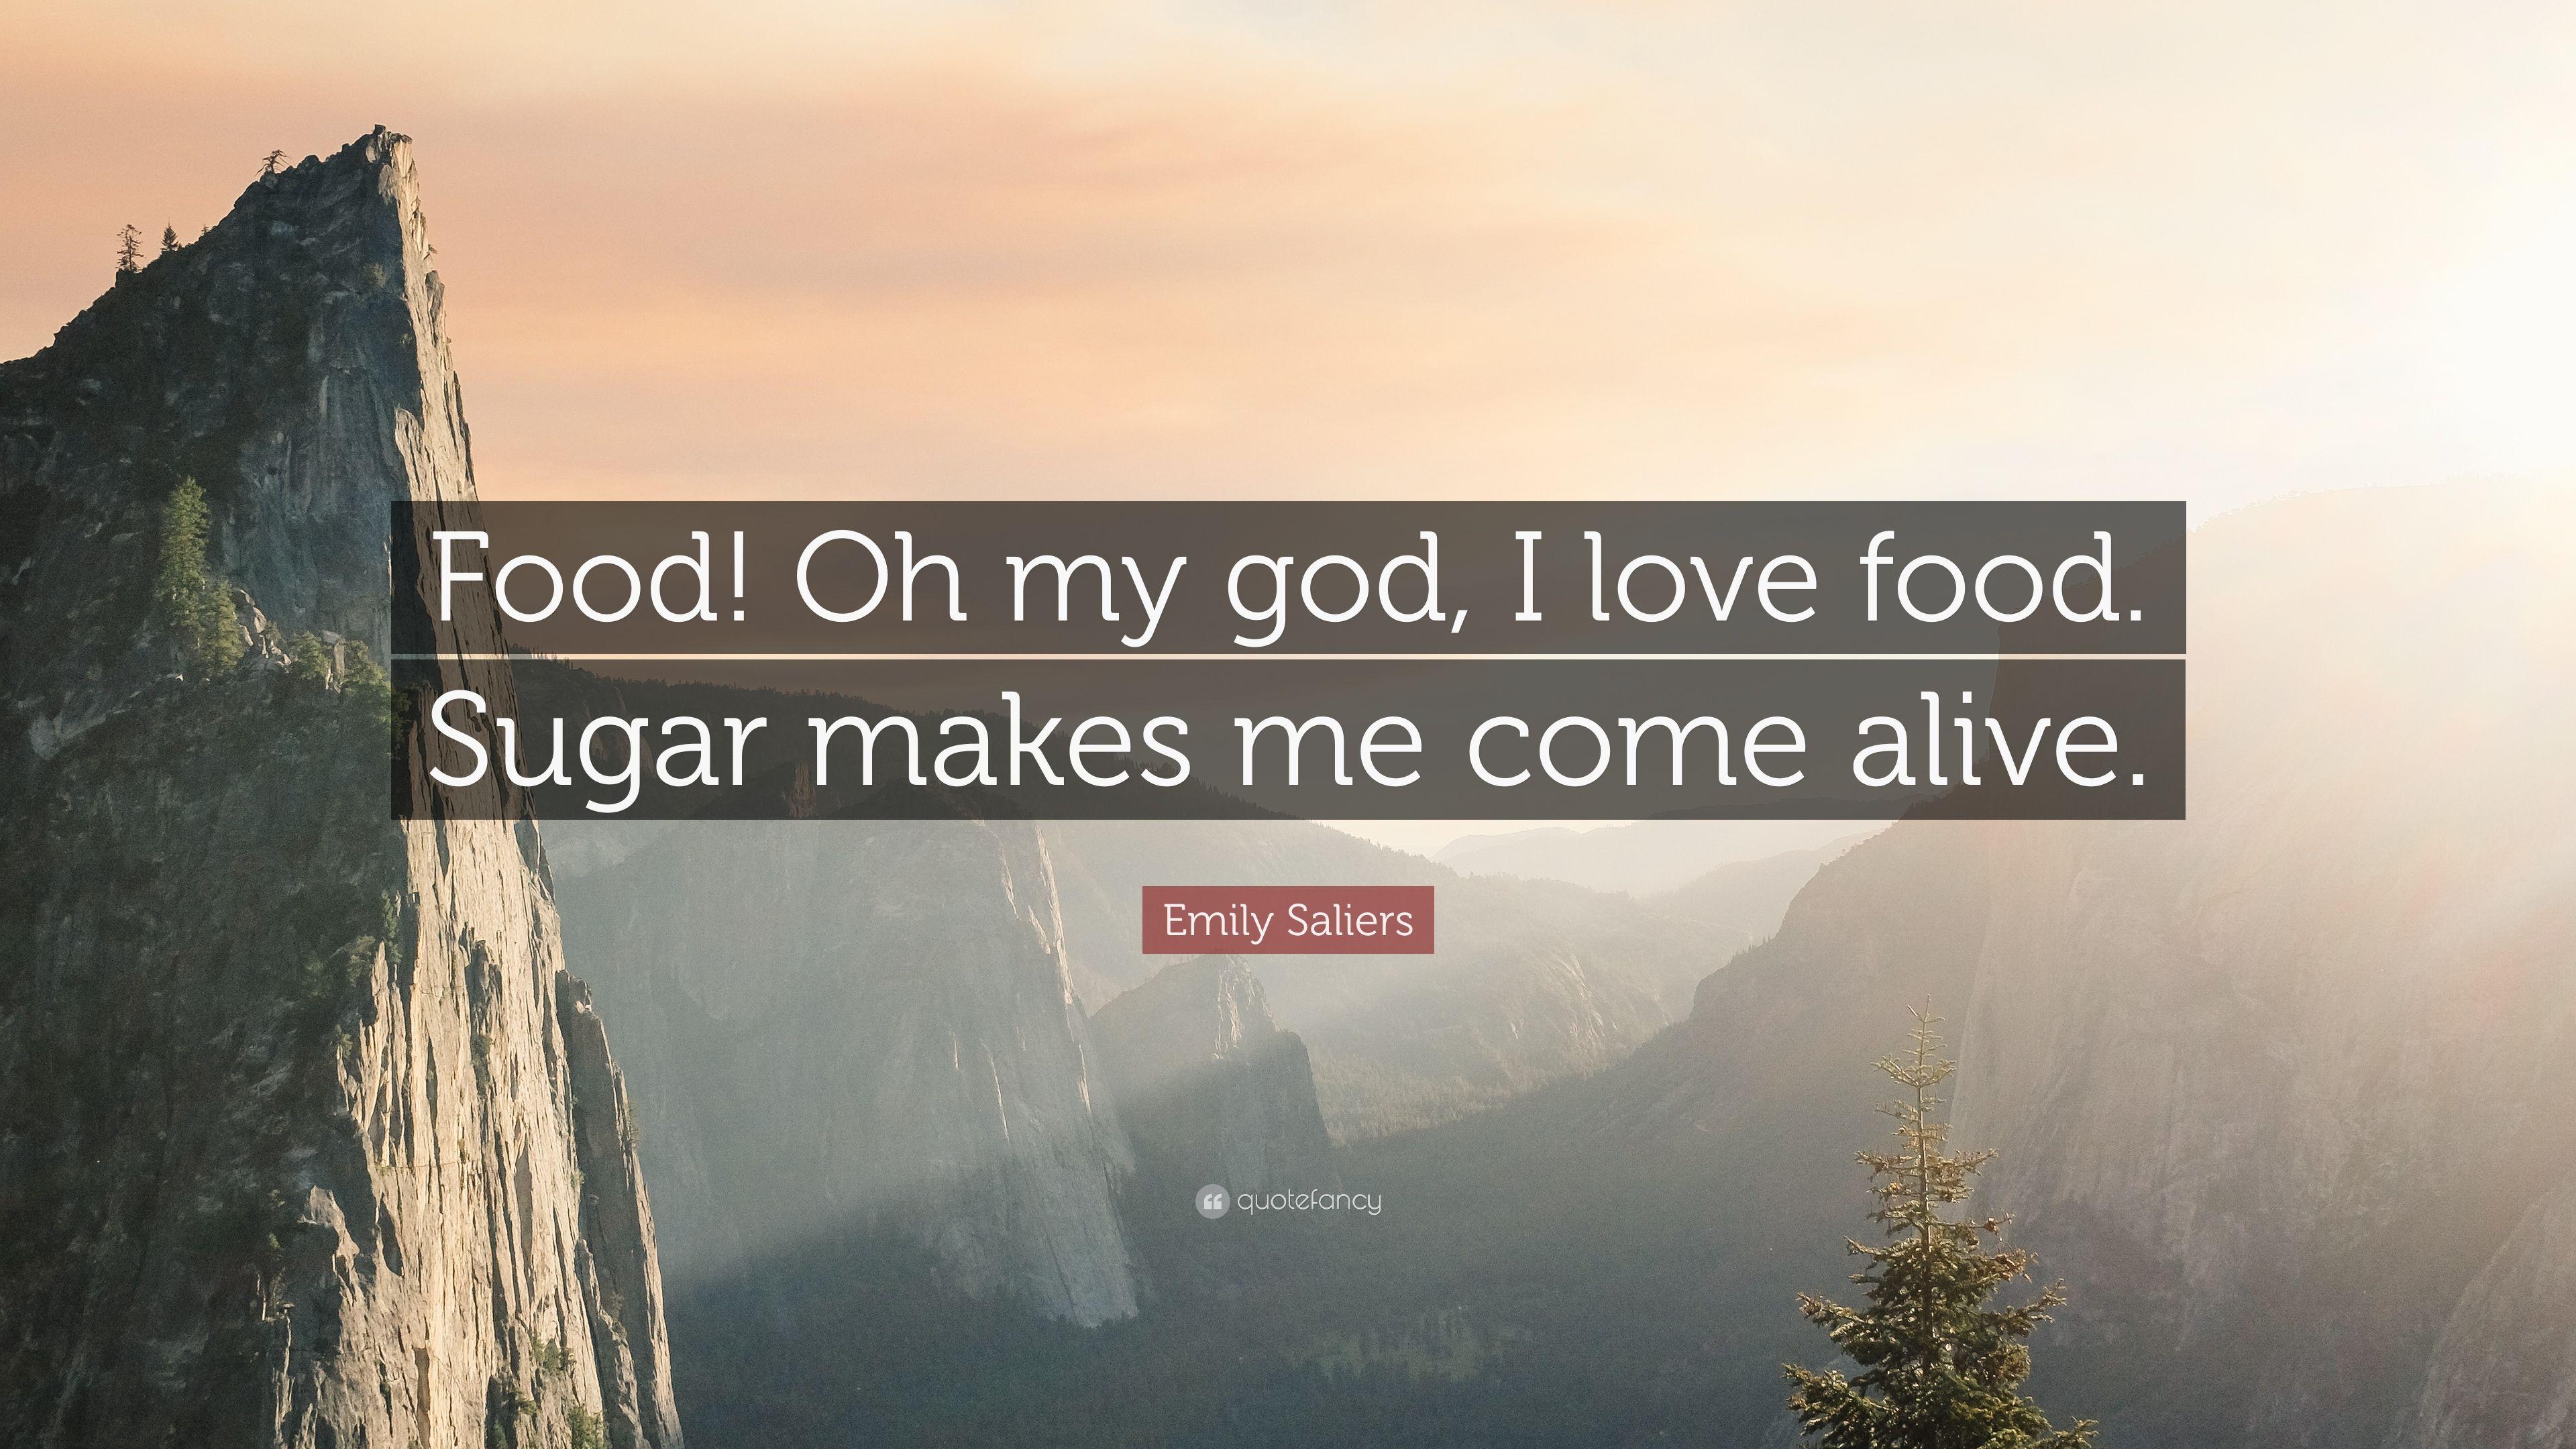 Emily Saliers Quote: “Food! Oh my god, I love food. Sugar makes me